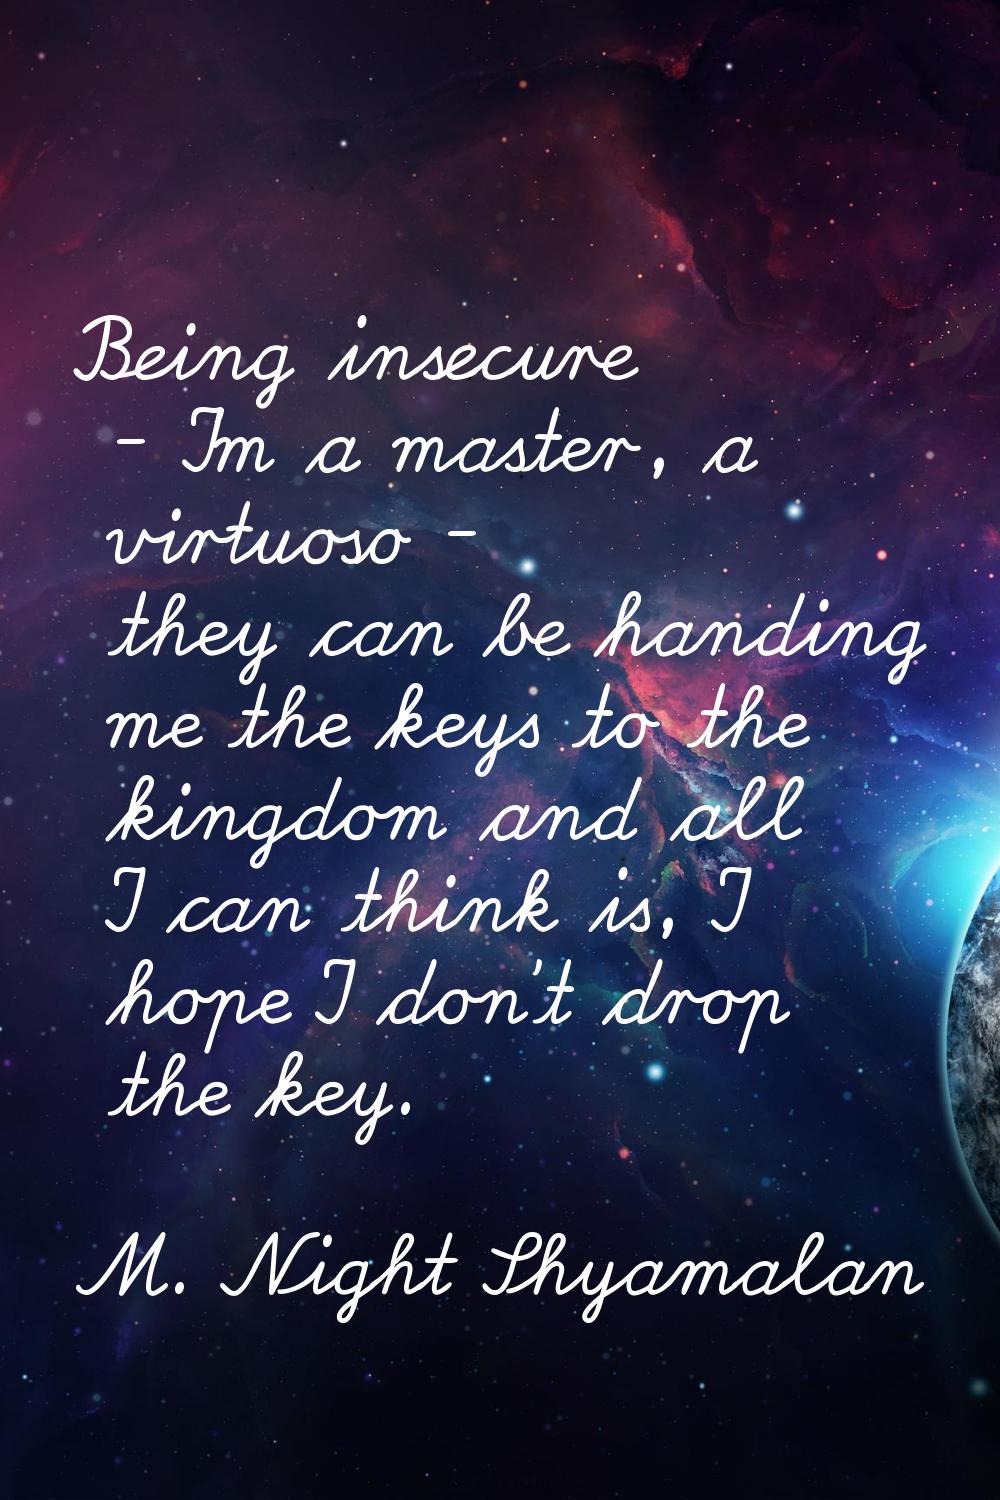 Being insecure - I'm a master, a virtuoso - they can be handing me the keys to the kingdom and all 